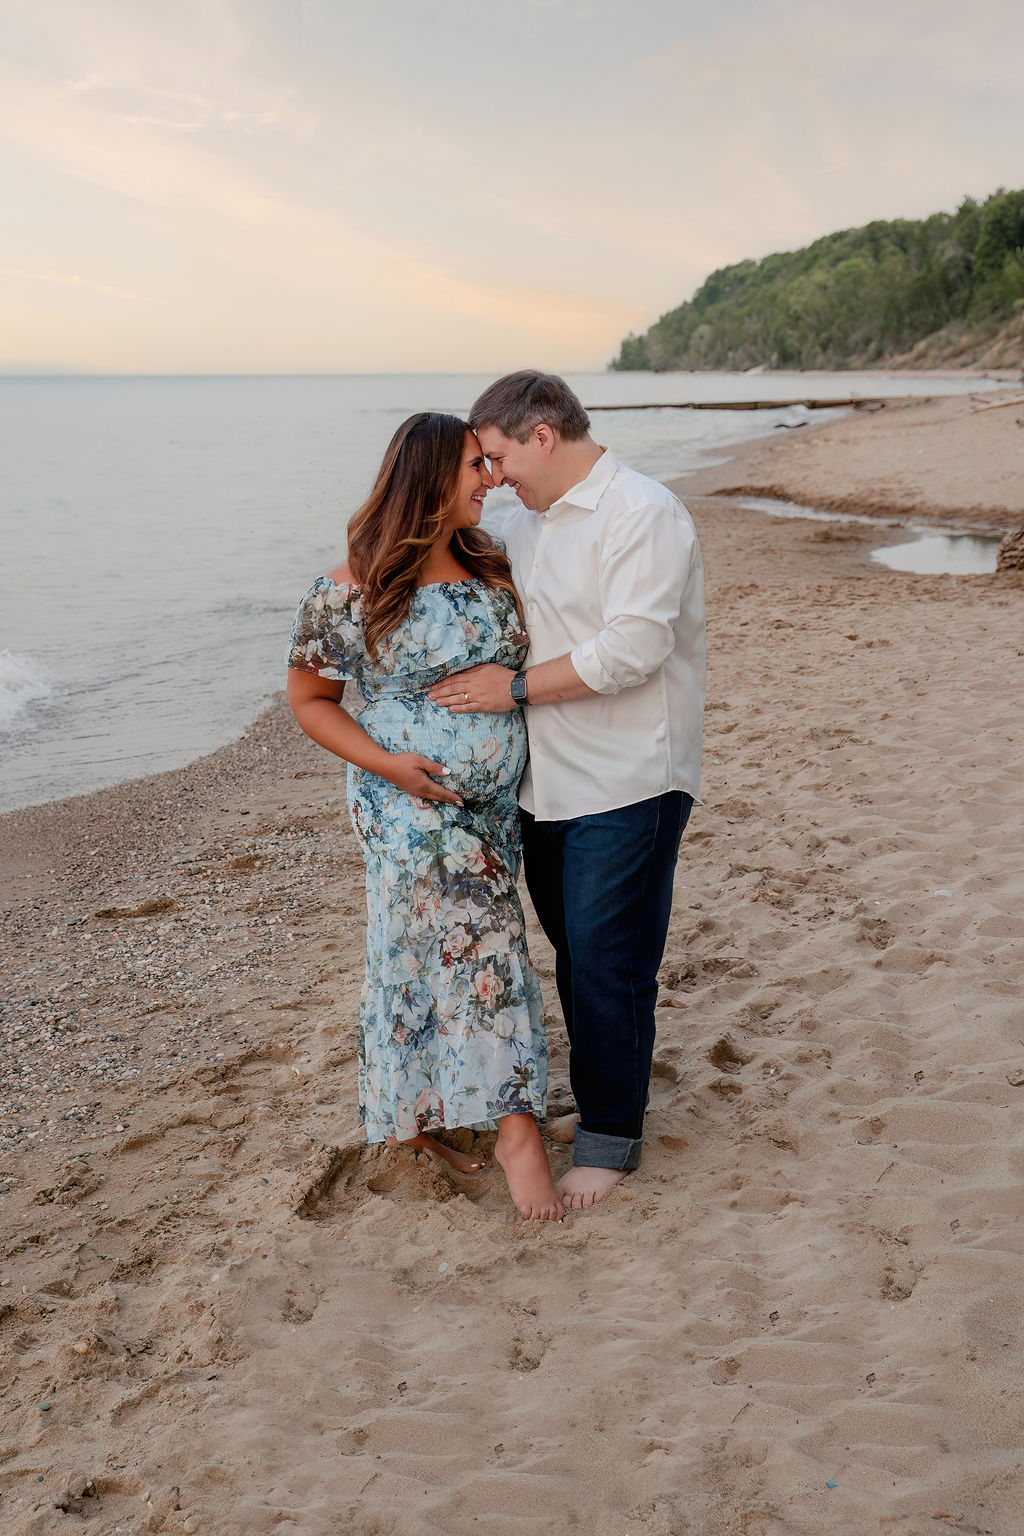 Expecting parents smile and touch foreheads and the bump while standing on a beach at sunset